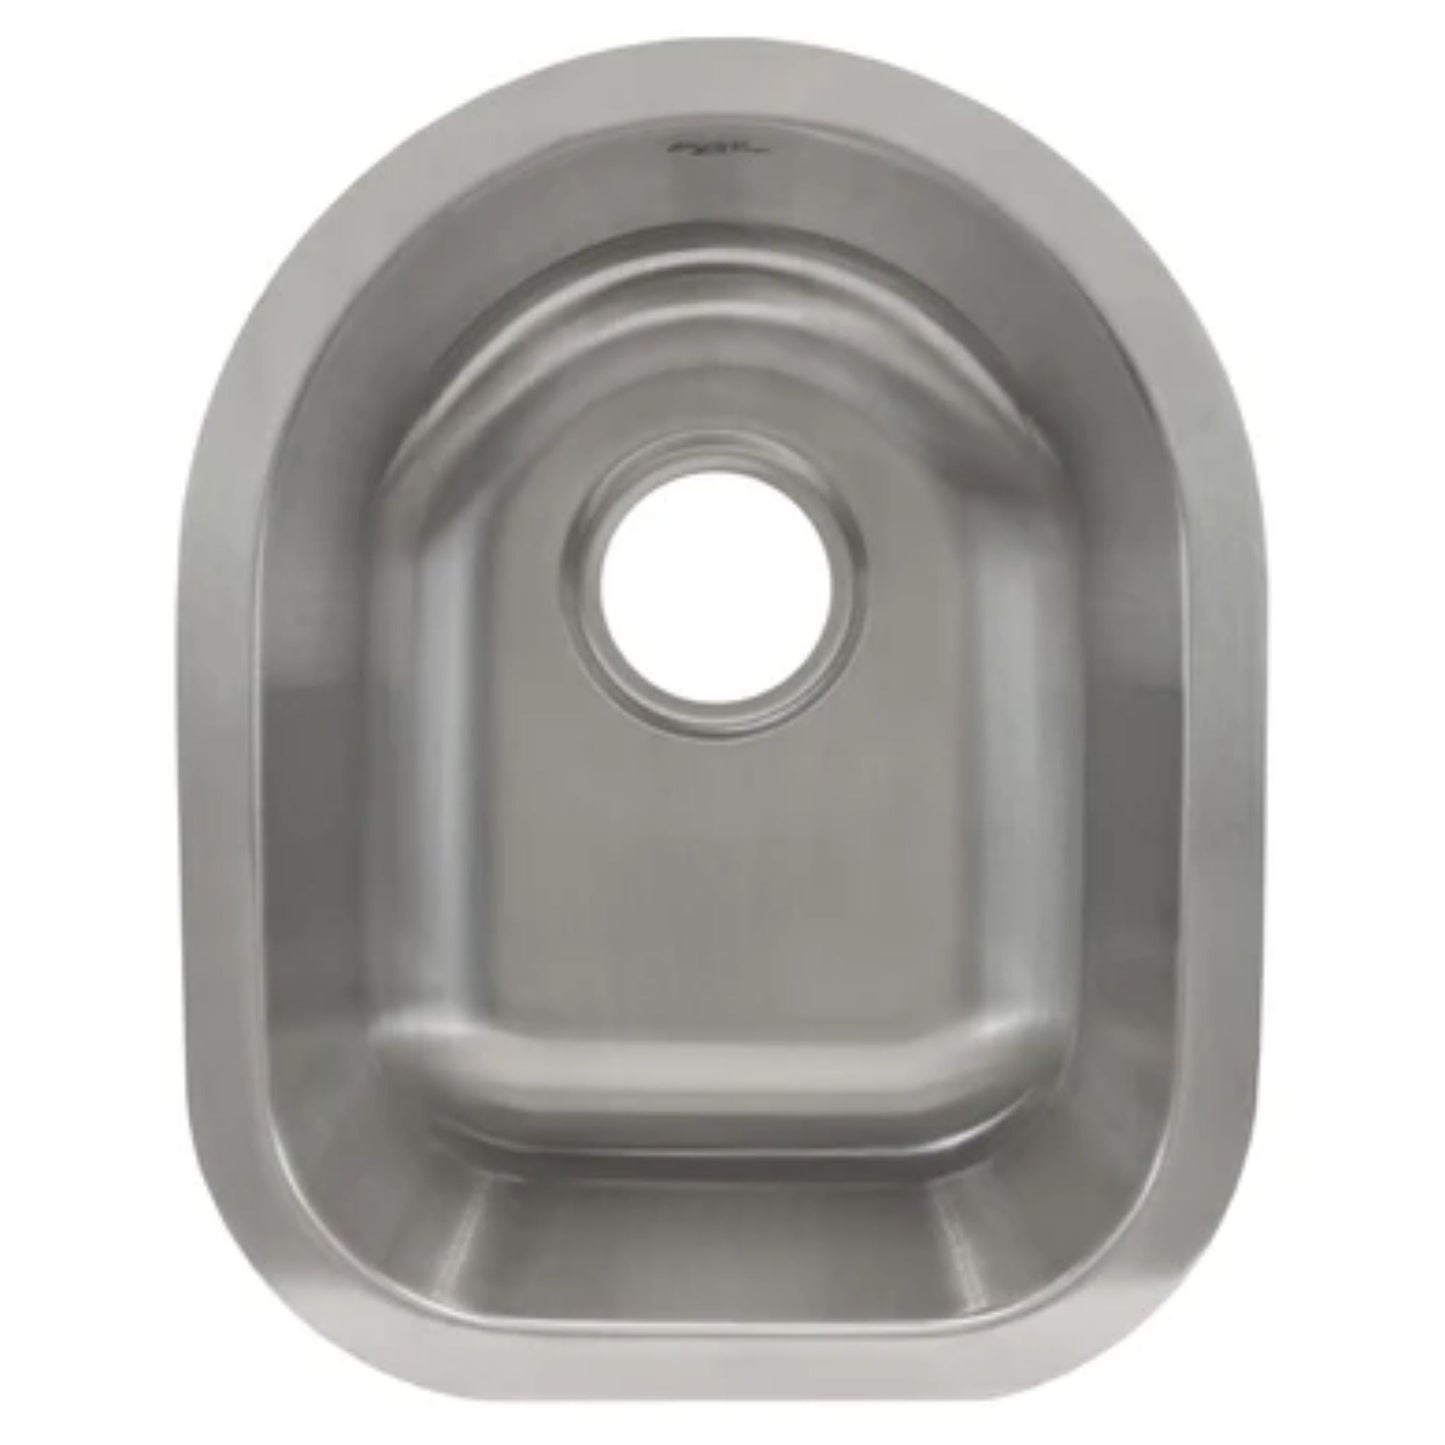 LessCare Undermount Stainless Steel Single Bowl Bar or Prep Sink - L104